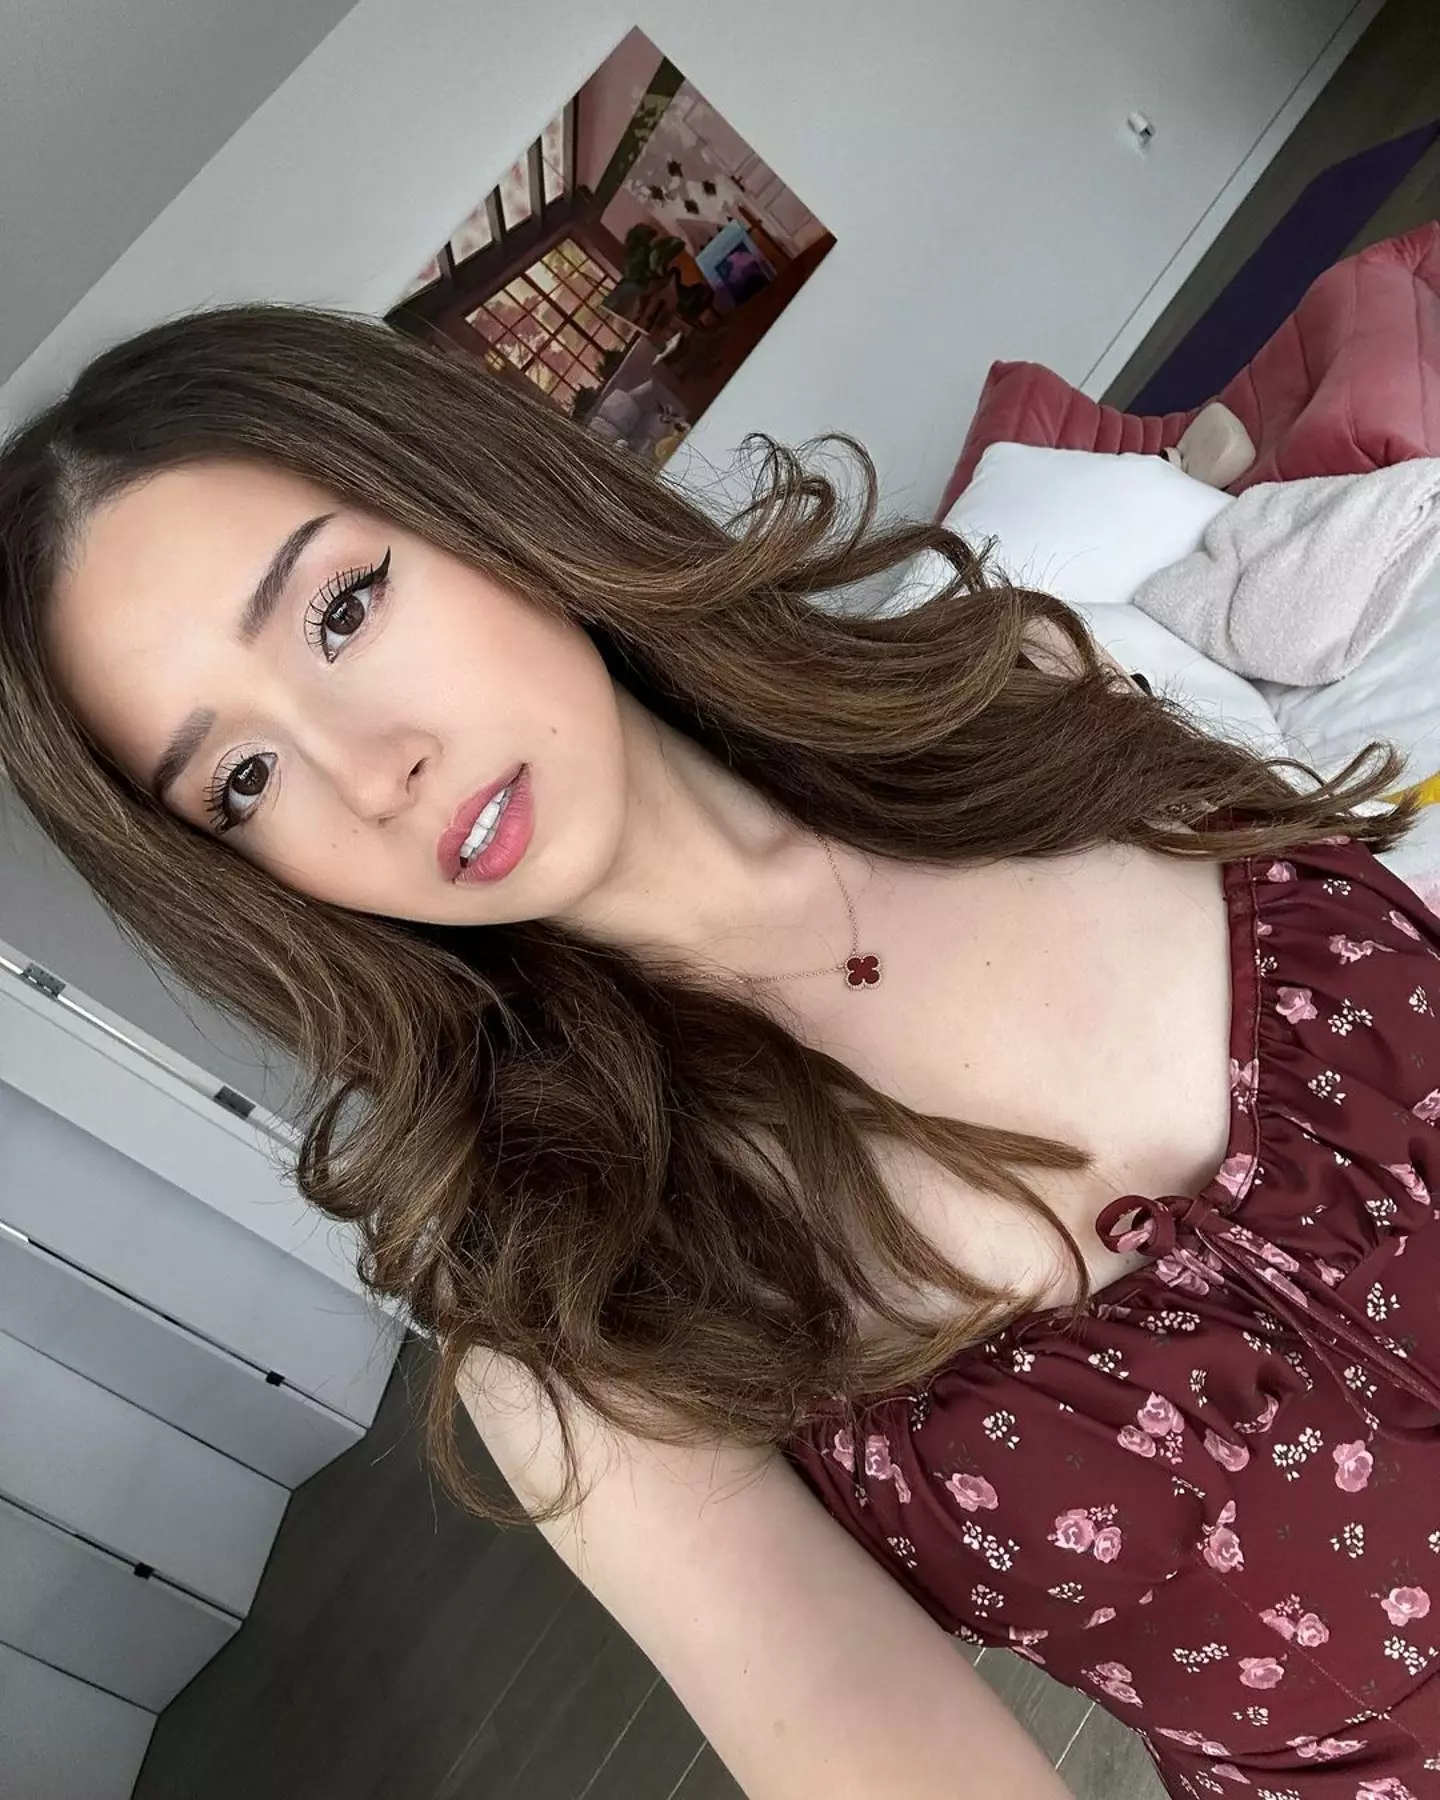 Pokimane is one of the many big names who has gotten on board to support Atrioc's project.